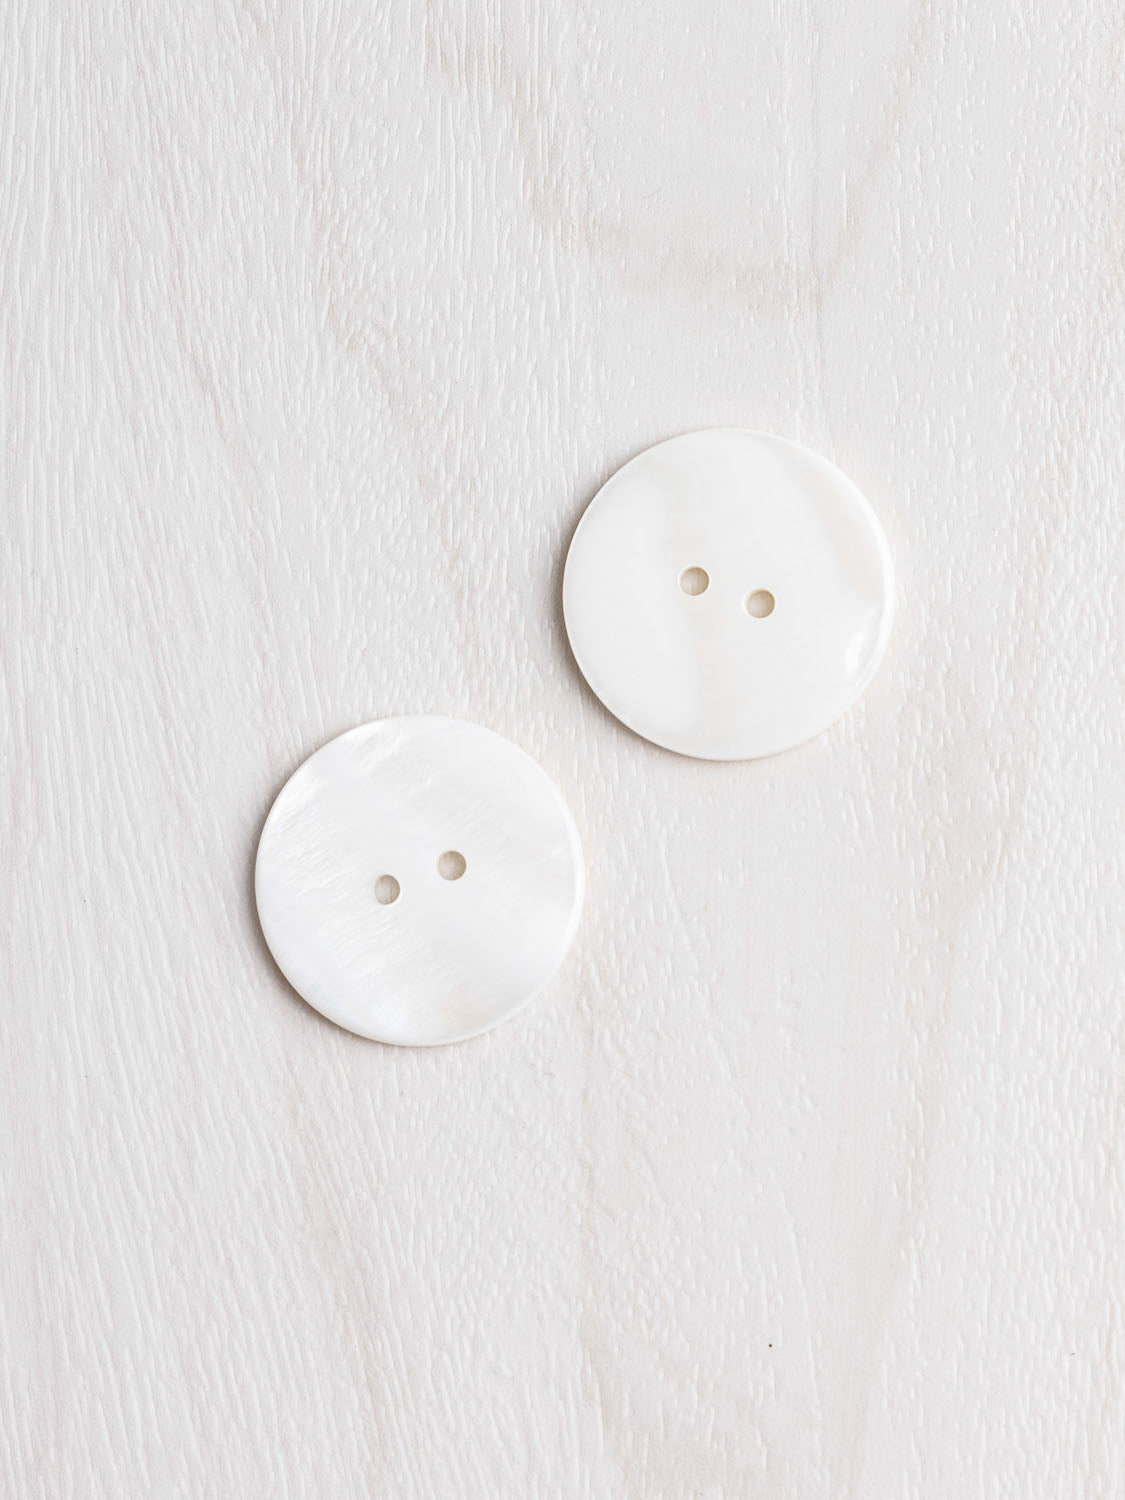 Mother of Pearl Buttons, Natural Shell , 4 Hole Sewing Knitting